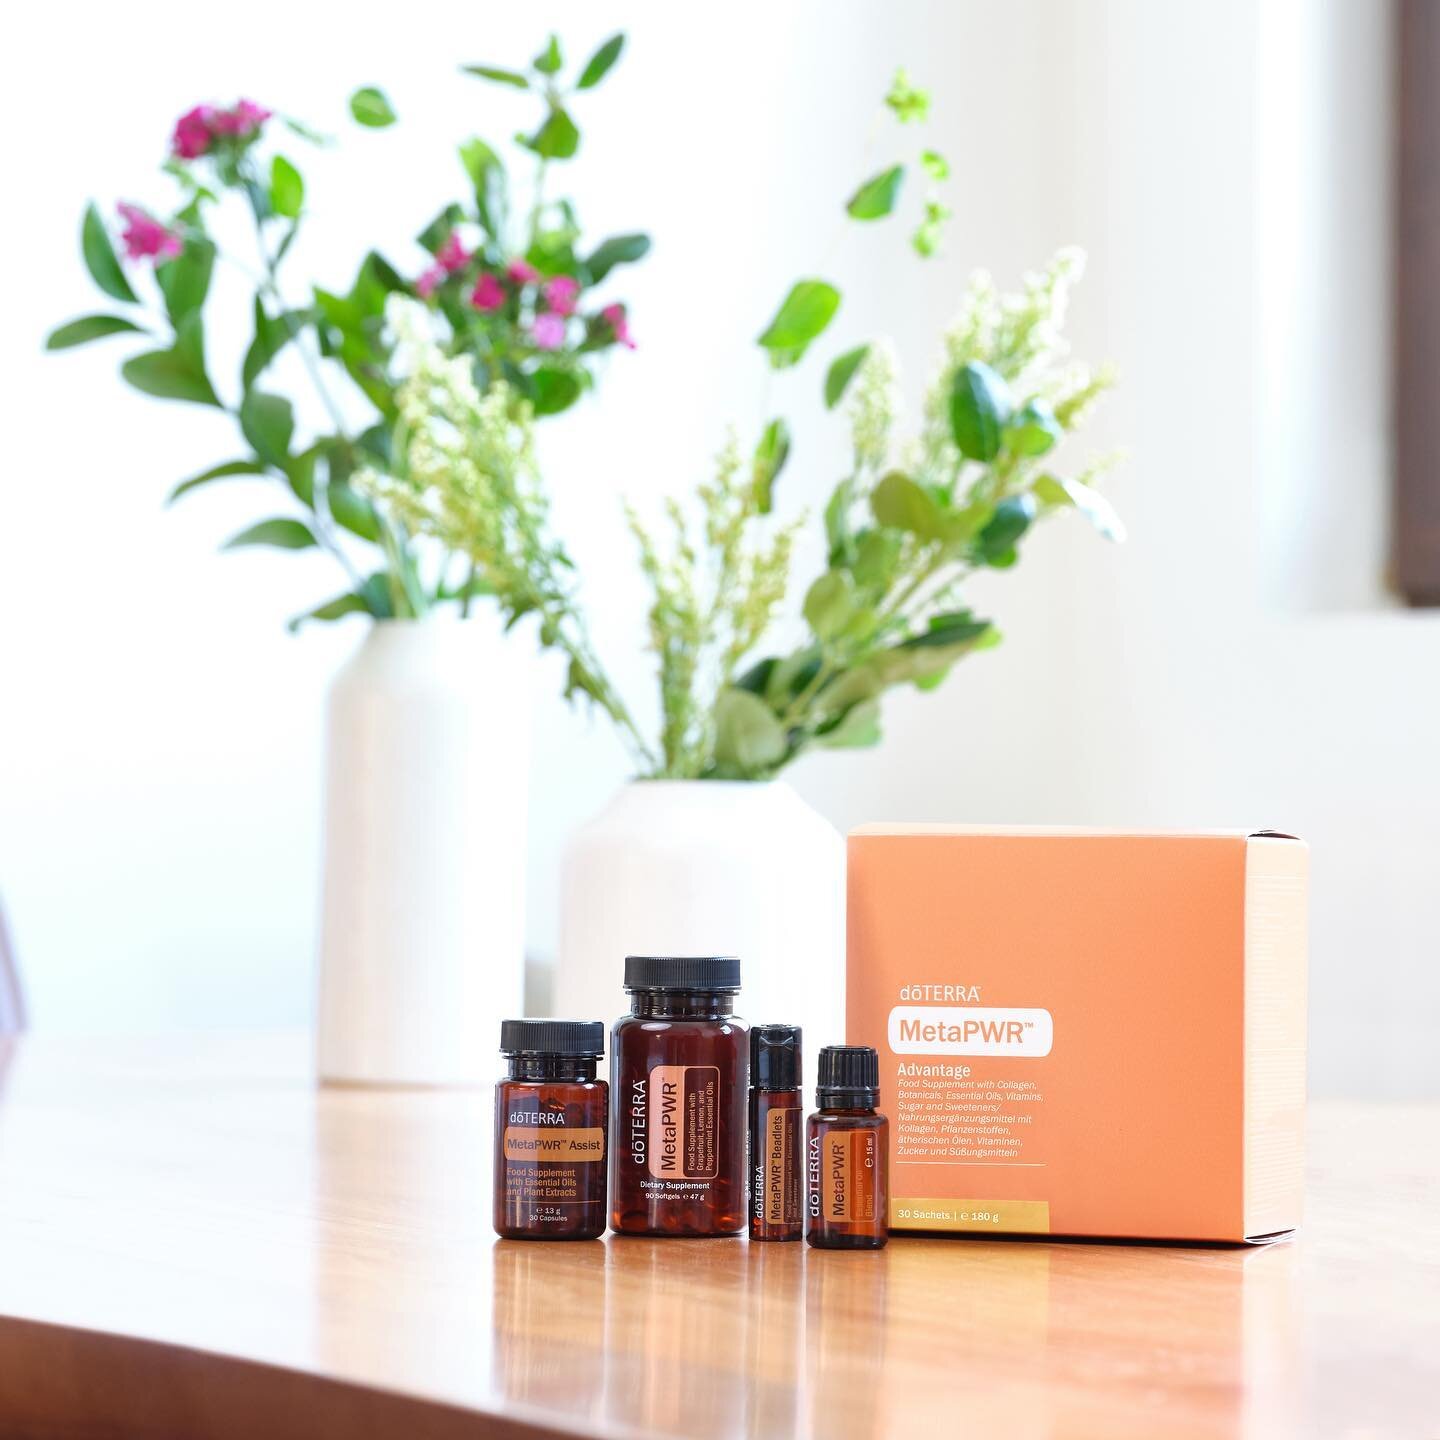 🧡 The MetaPWR System

You might have seen my posts about the dōTERRA SHINE ✨ Convention in Lisbon - finally MetaPWR is for sale in Europe and you can really shine from the inside out!

☀️ This is a revolutionary science-based system that helps y